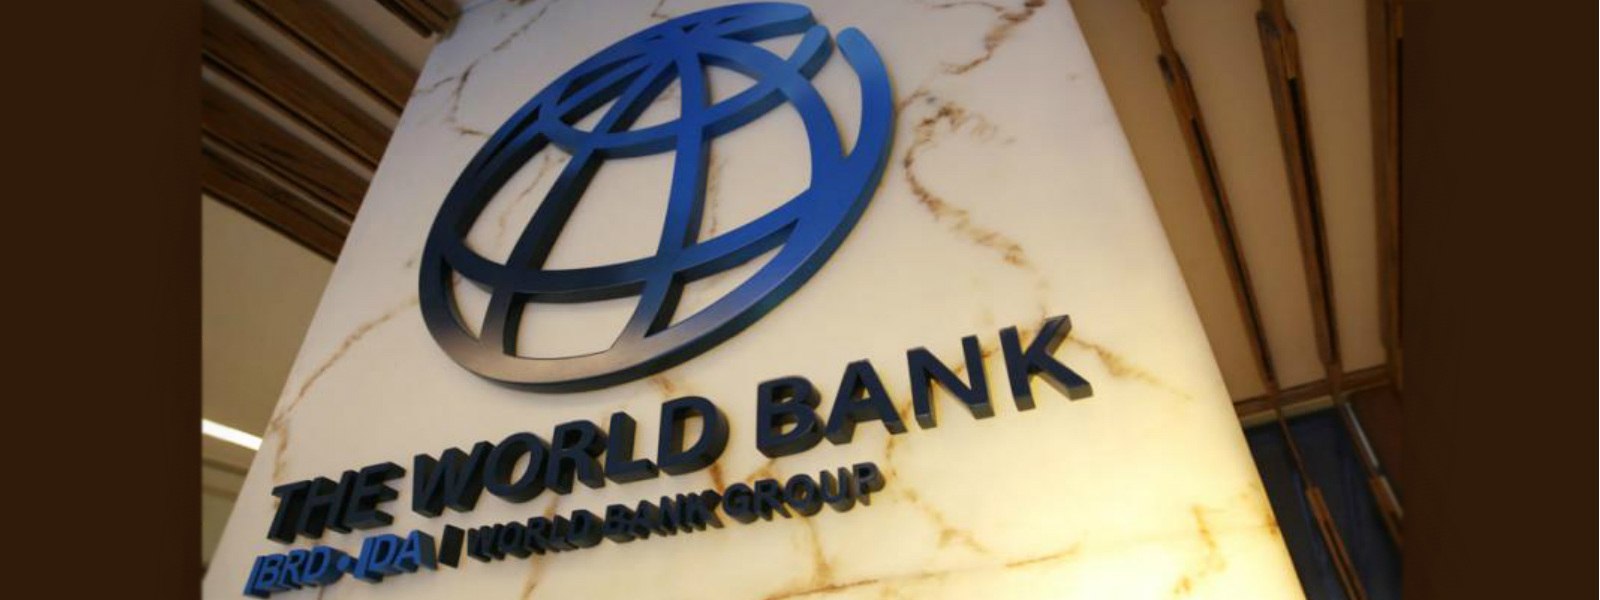 SL has the worst accident rates in SA: World Bank